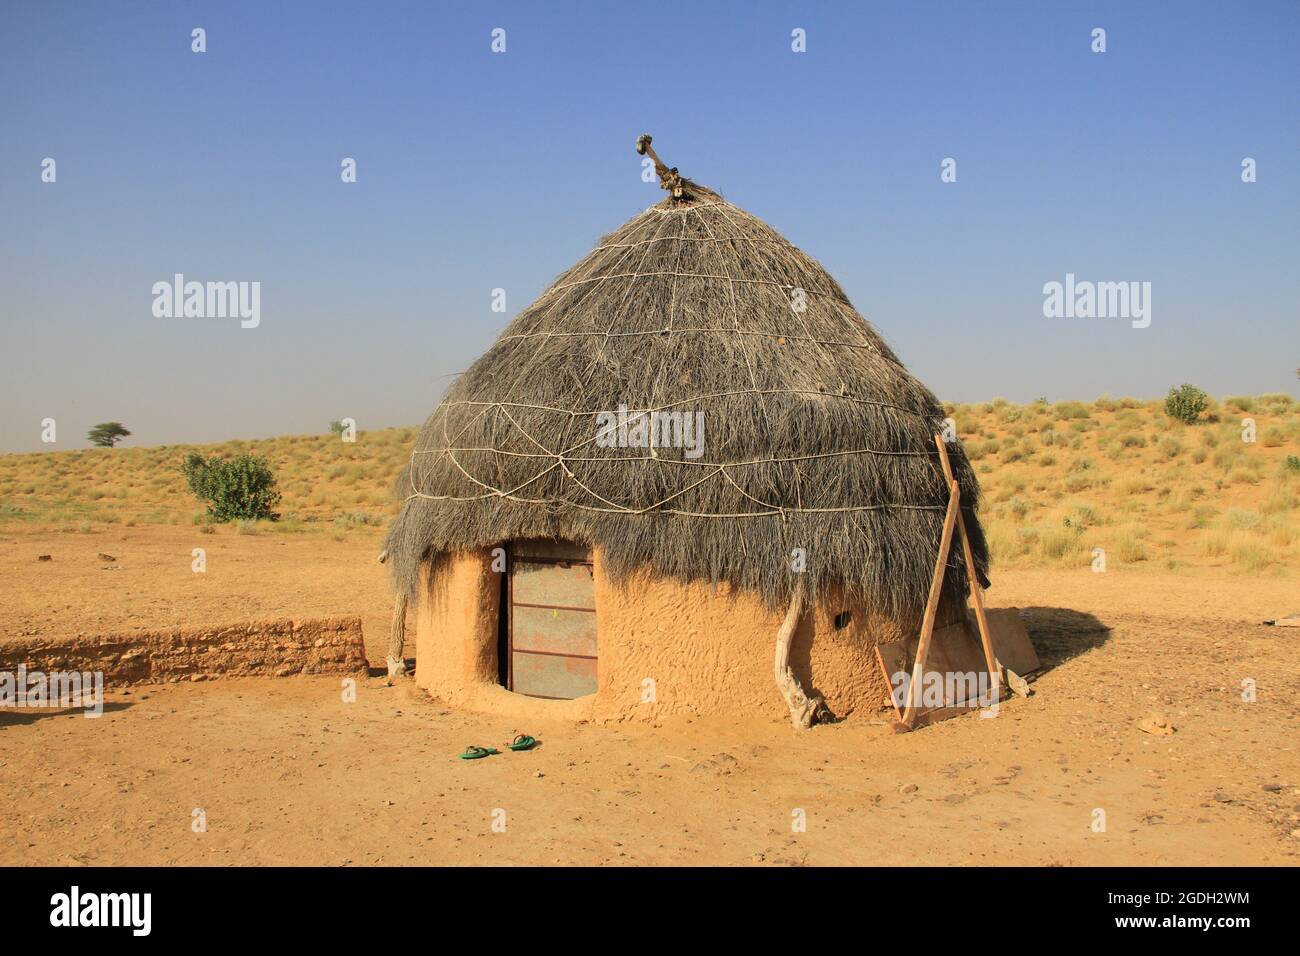 A photo of a traditional thatched roof clay and mud hut and home on a clear sunny blue sky day in Thar desert in Rajasthan, India Stock Photo